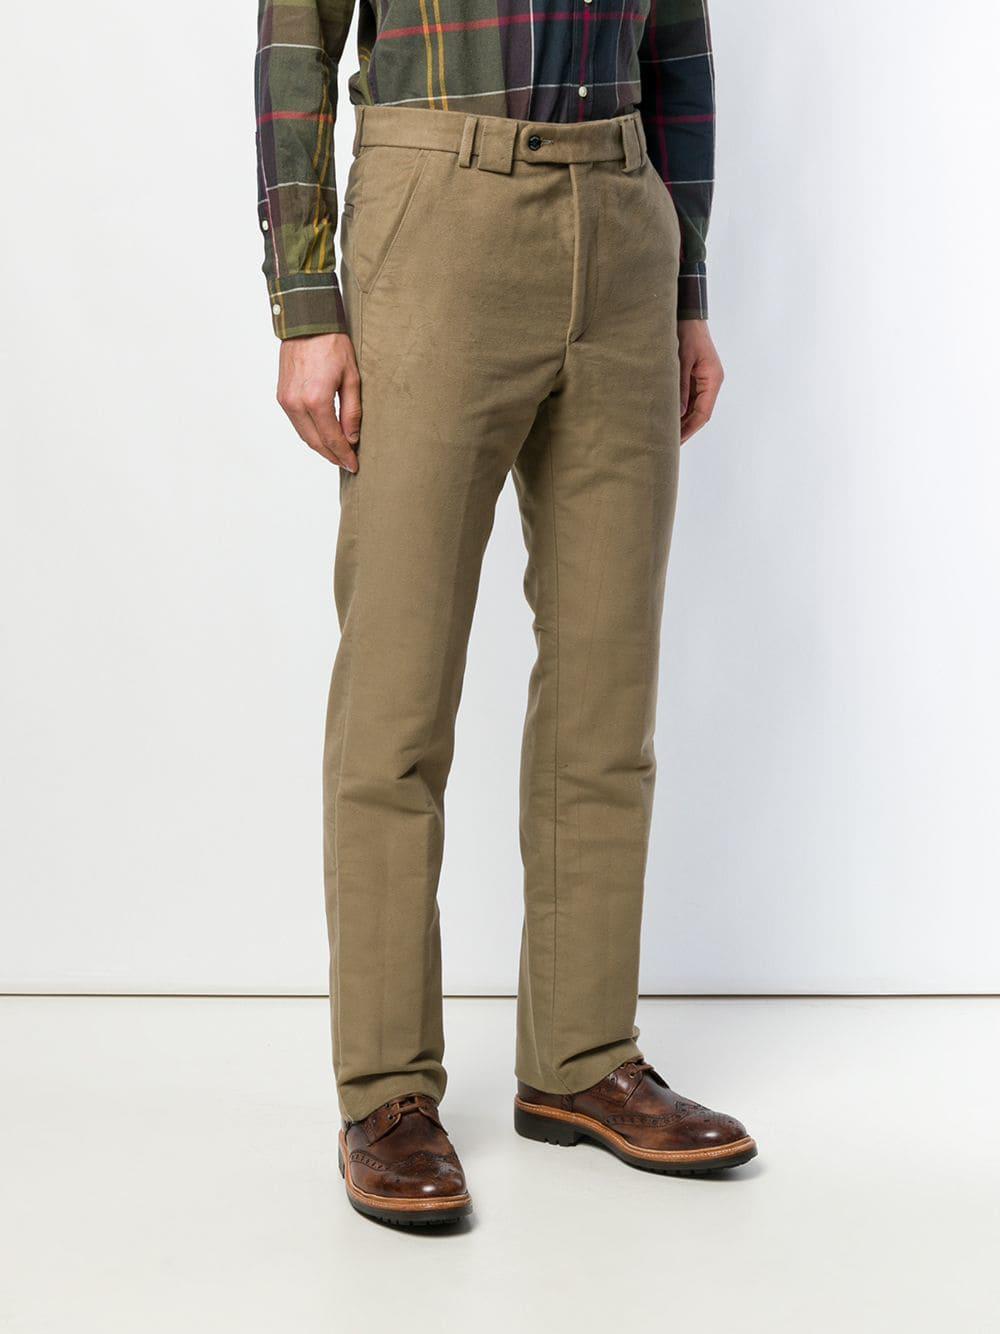 Details more than 87 barbour ladies trousers latest - in.coedo.com.vn